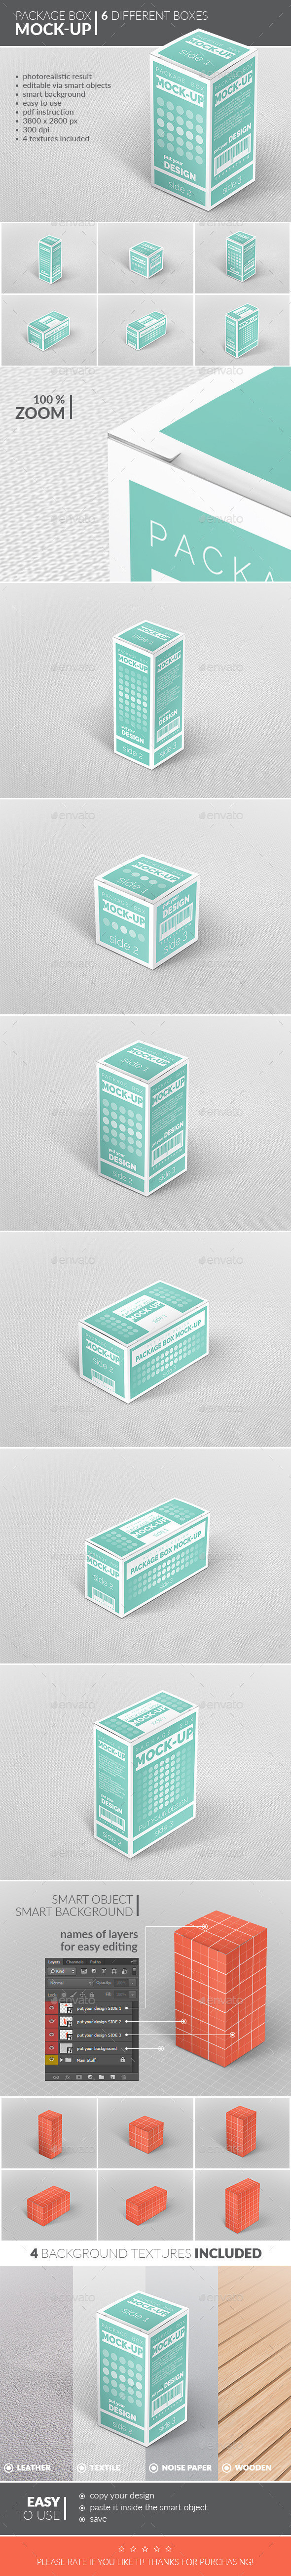 Preview mock up box